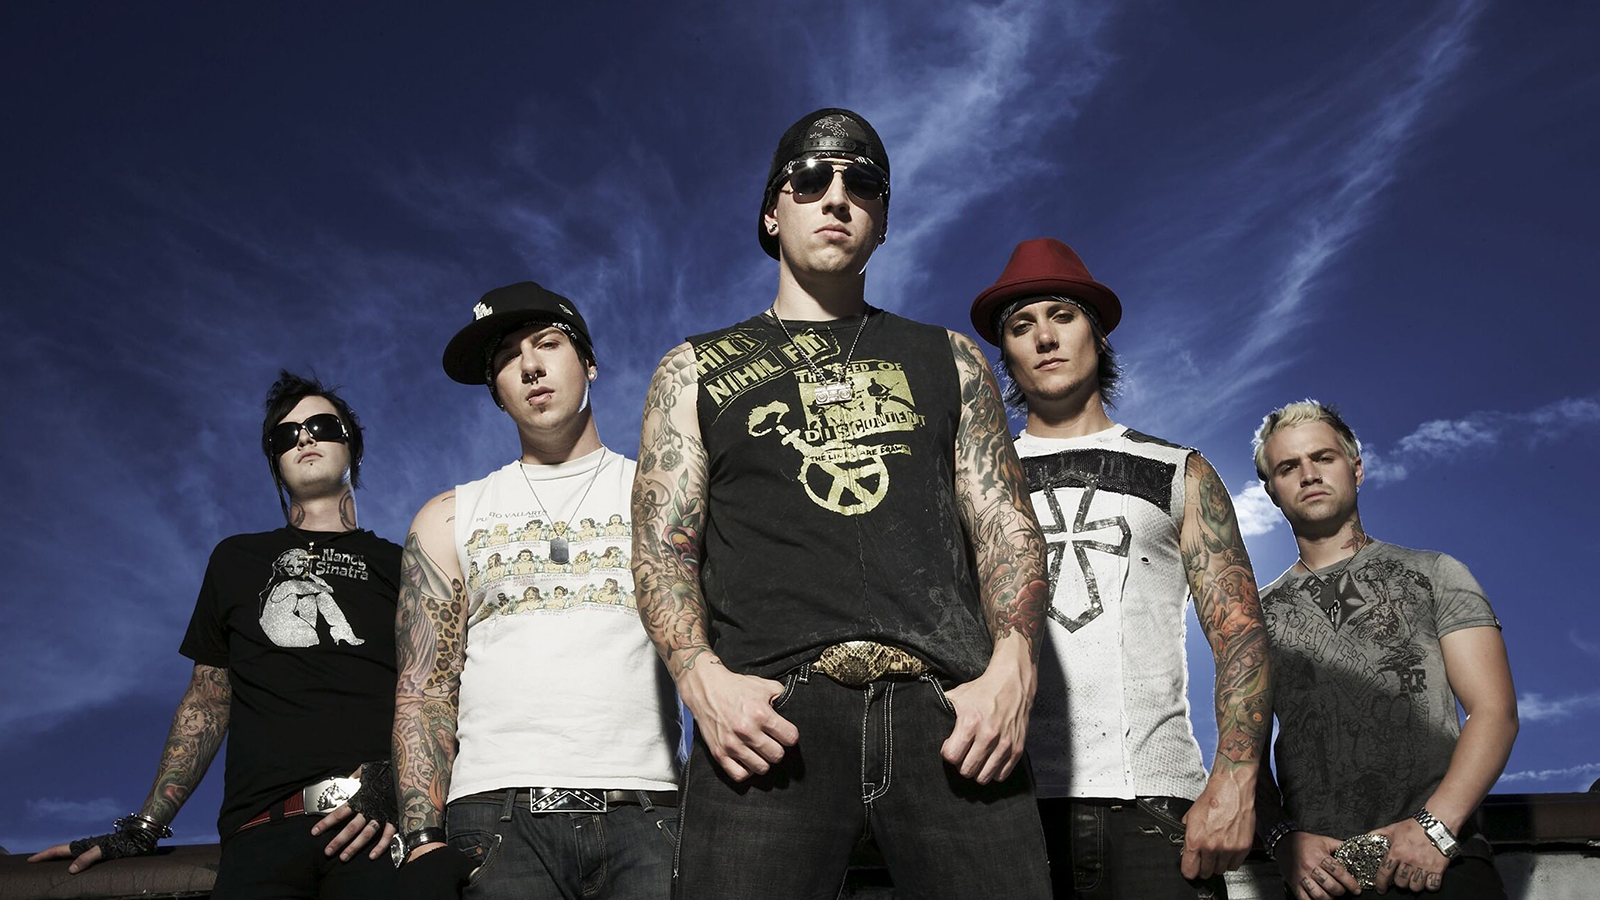 AVENGED SEVENFOLD discography and reviews